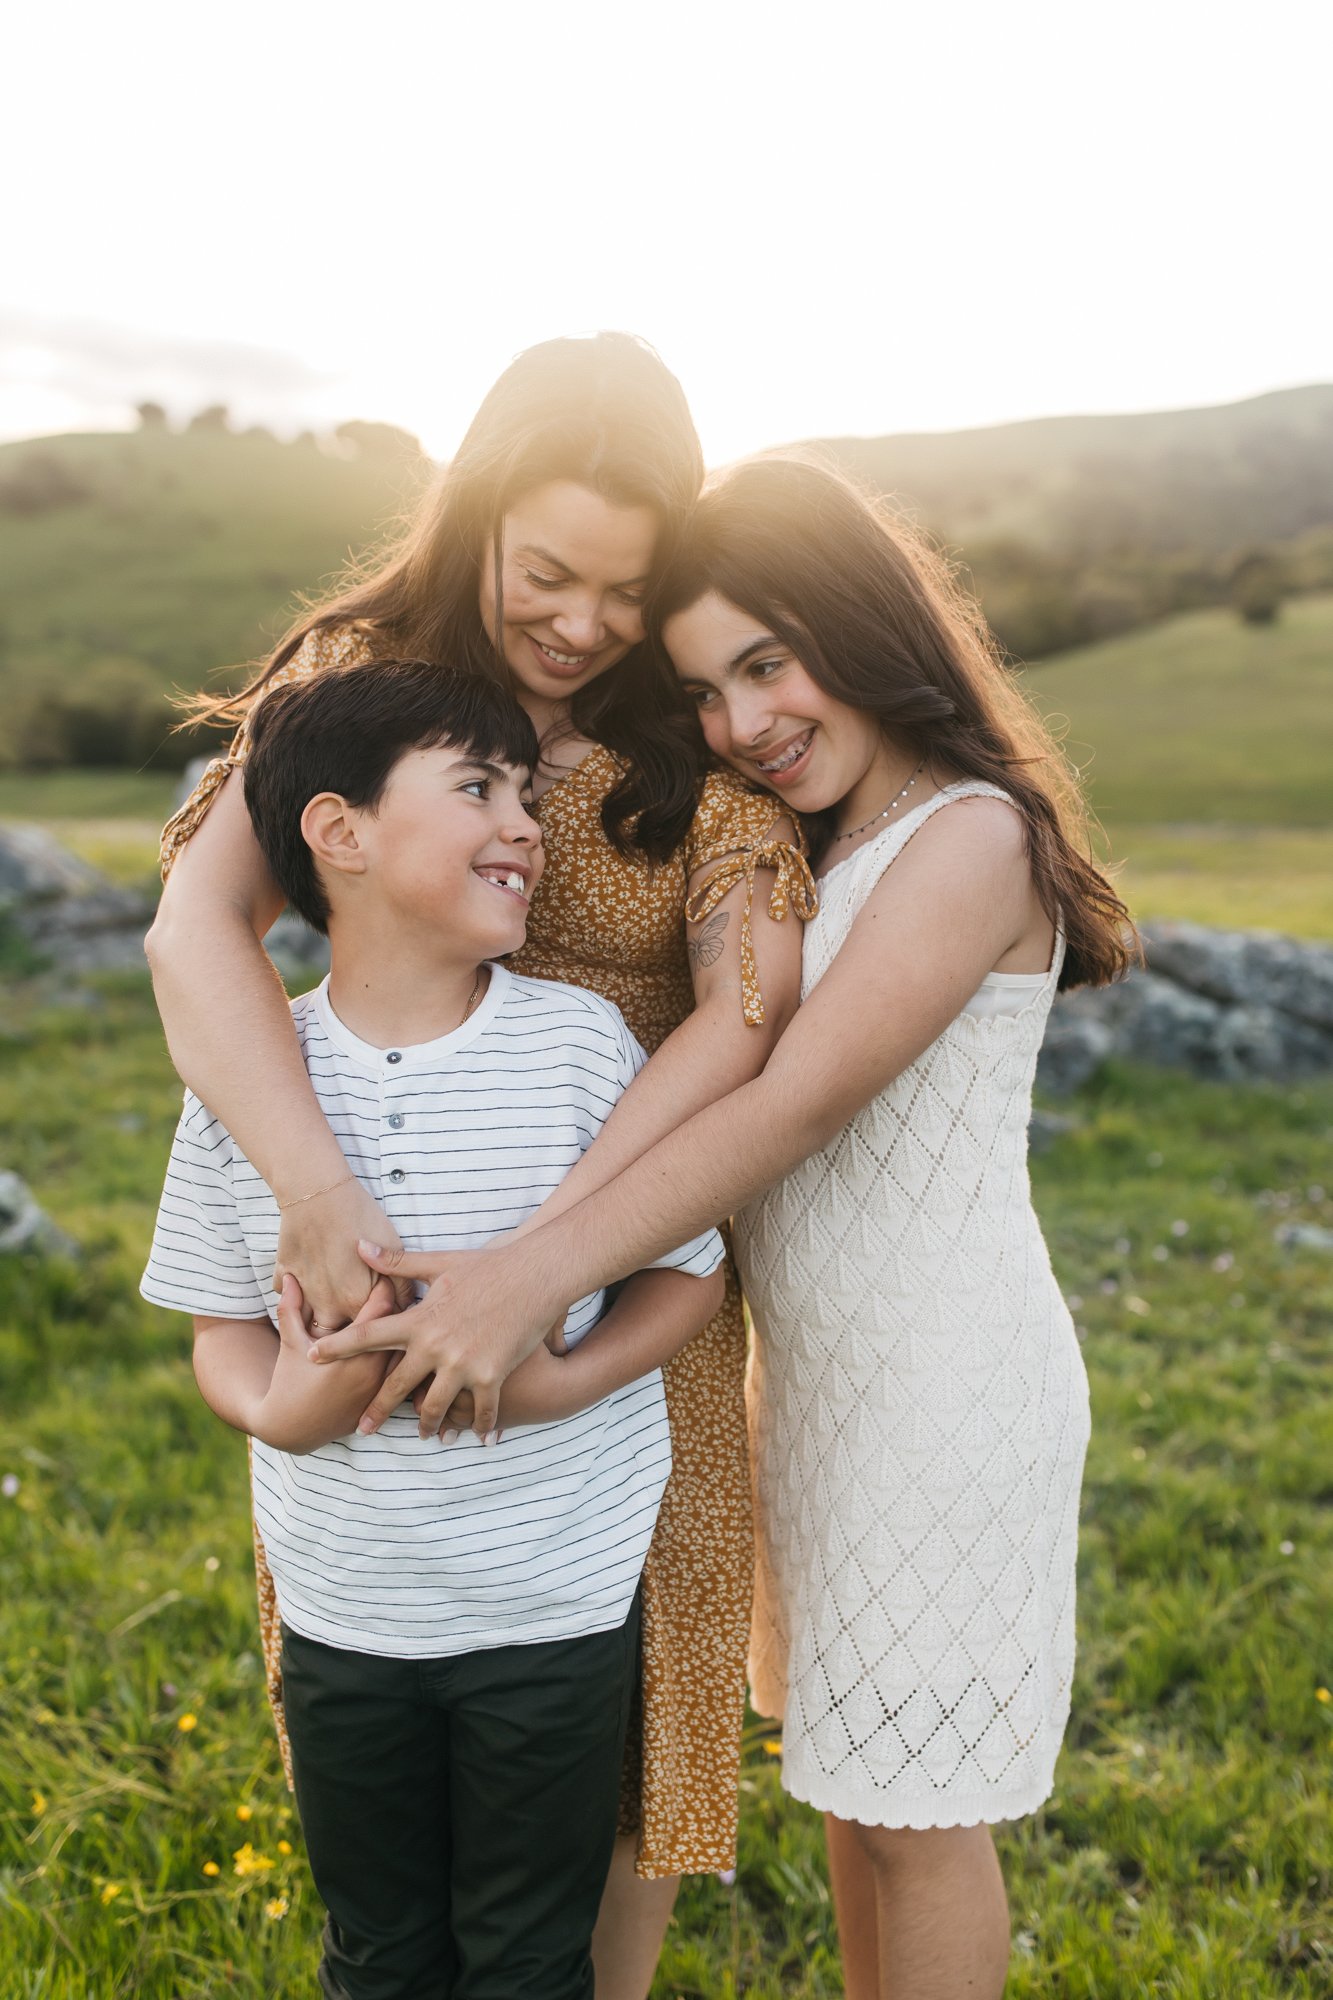 outdoor family outfit photo ideas from san francisco family photographer and marin family photographer Cristin More_11.jpg